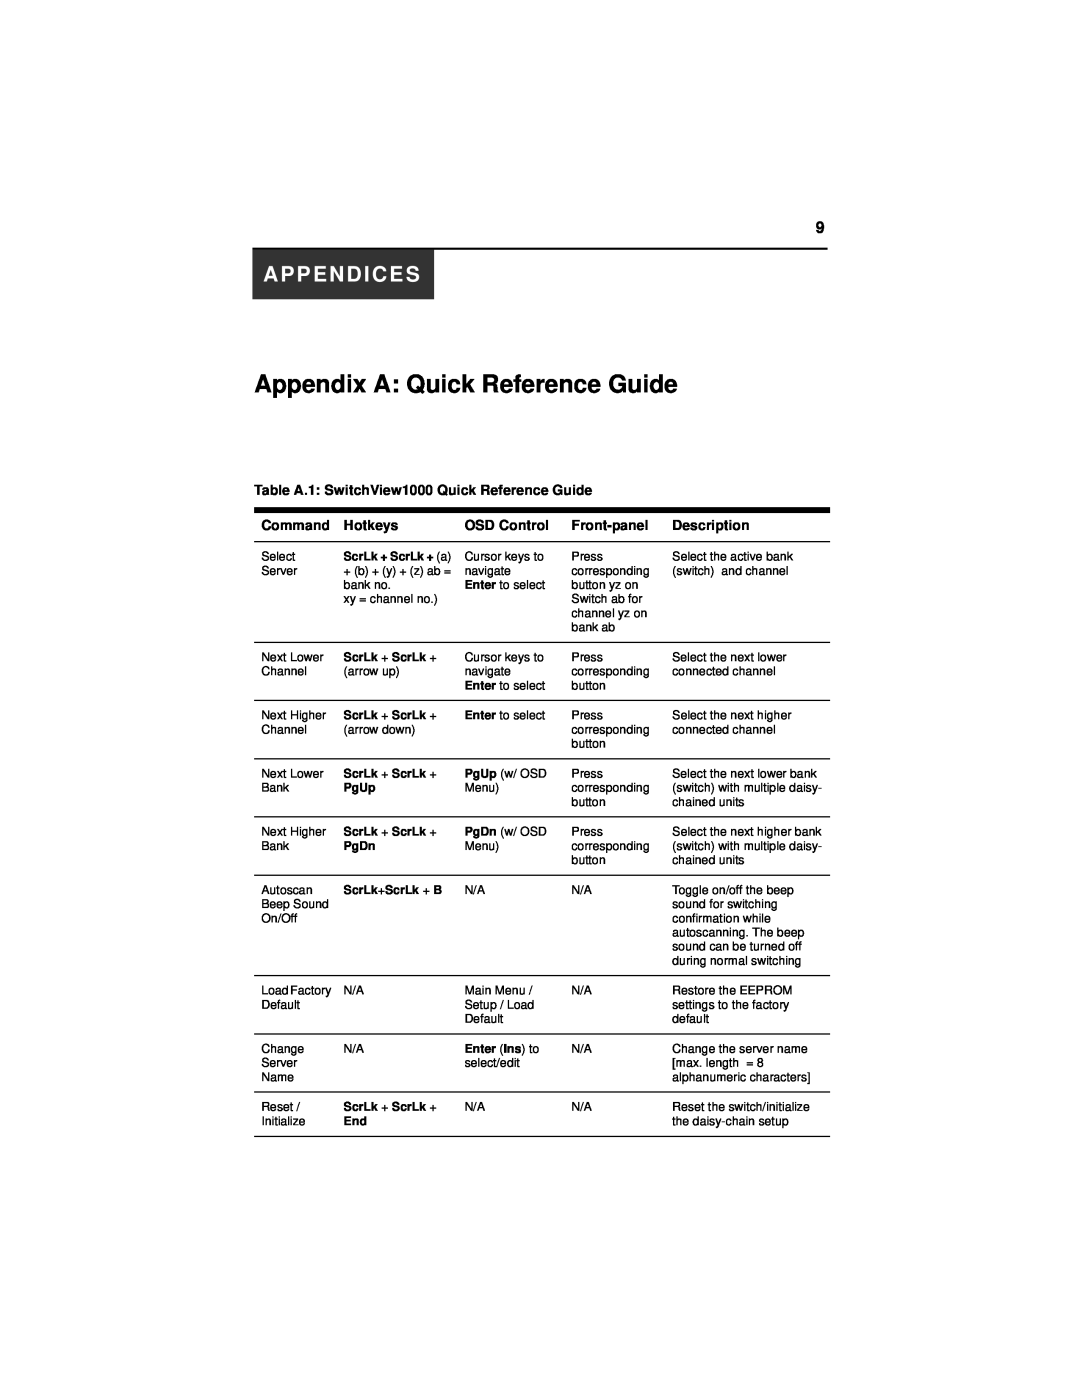 Avocent Appendix A Quick Reference Guide, Appendices, Table A.1 SwitchView1000 Quick Reference Guide, Command, Hotkeys 